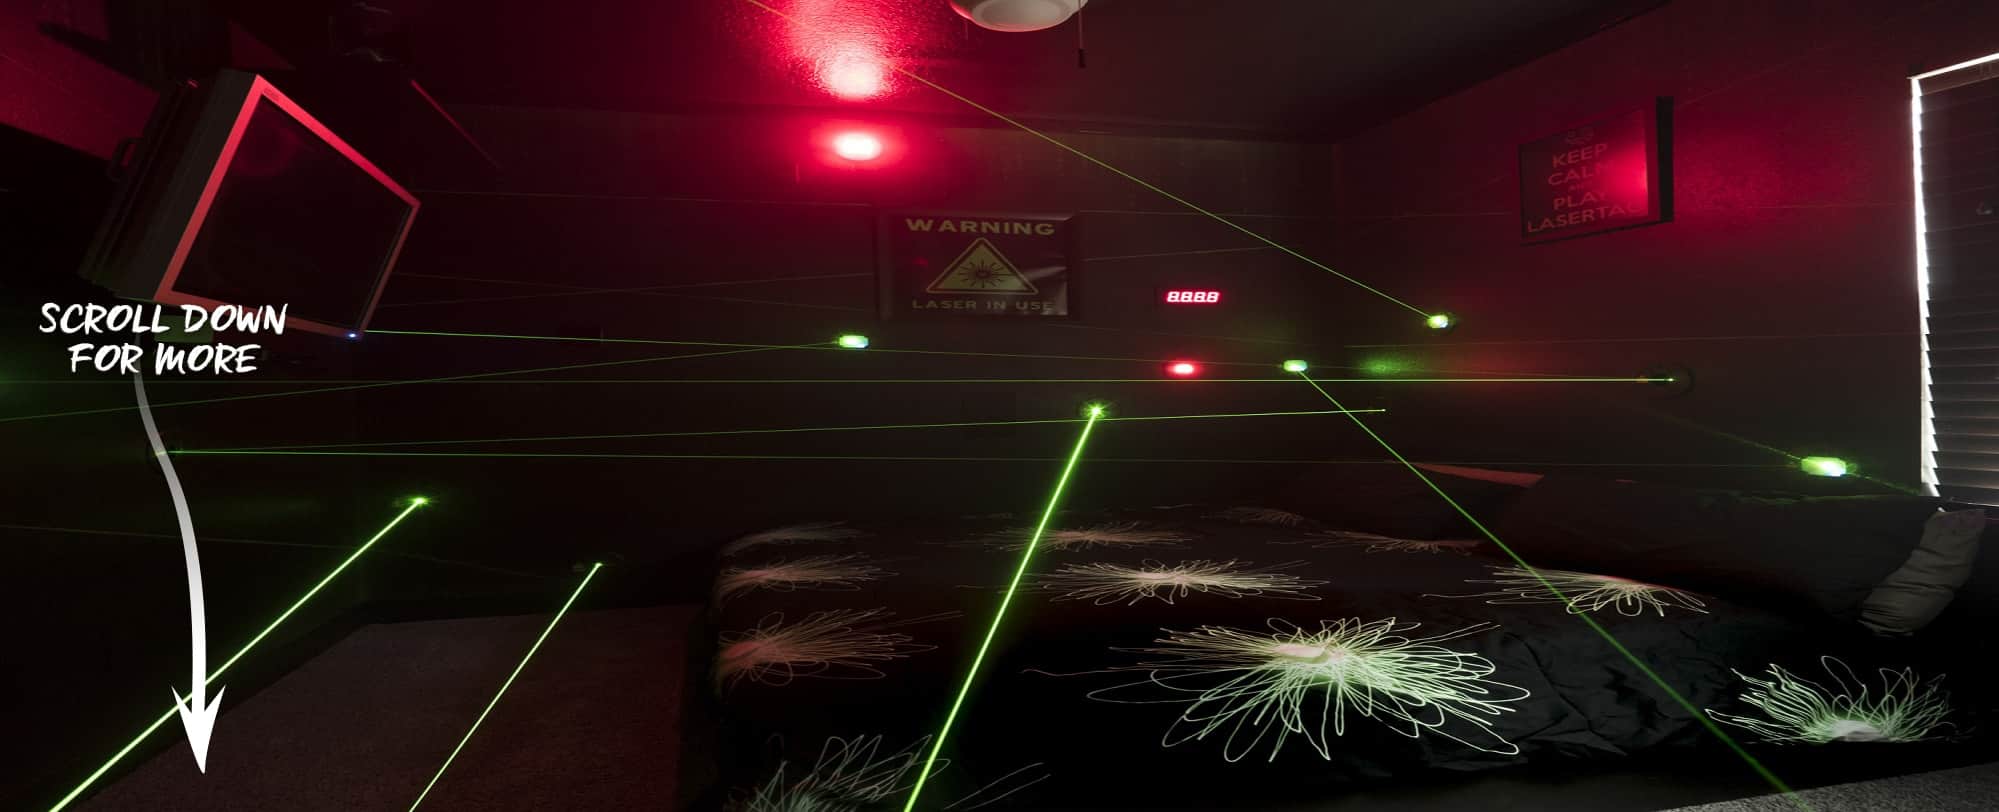 Laser Maze at The Great Escape Lakeside Mega Vacation Home Rental for reunions, weddings, and retreats